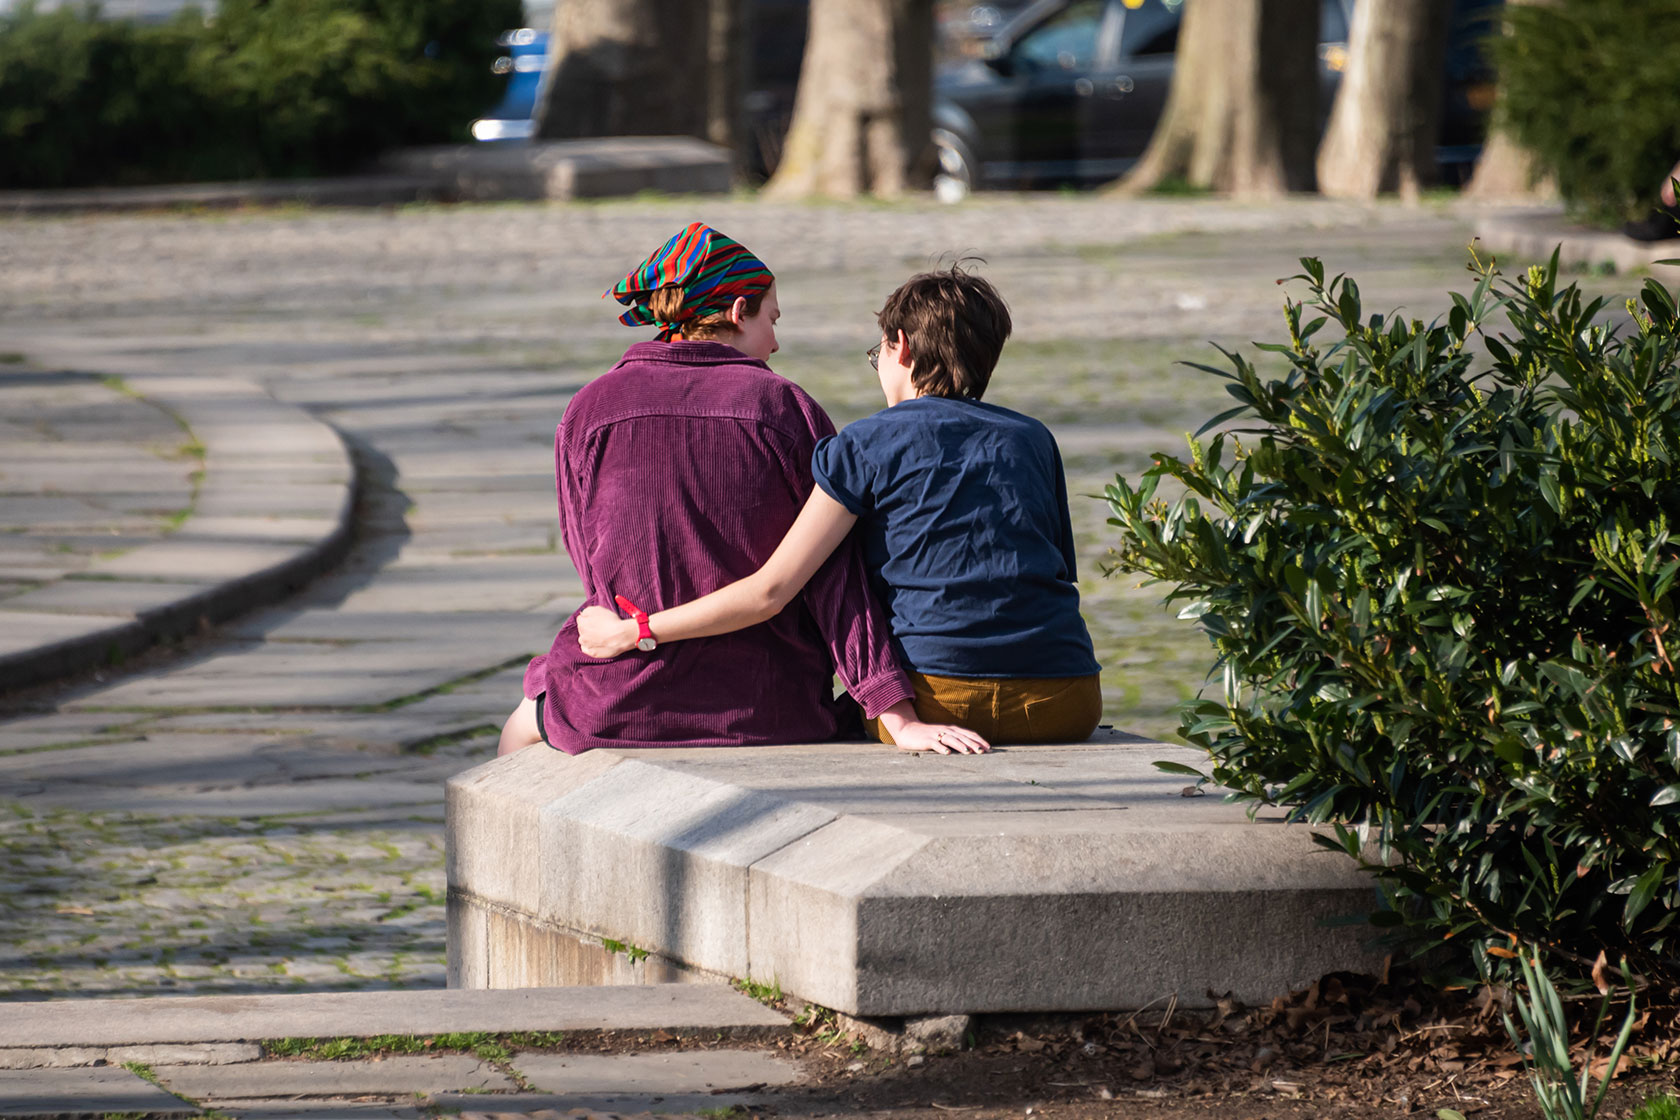 Photo shows a couple sitting together on a park bench.